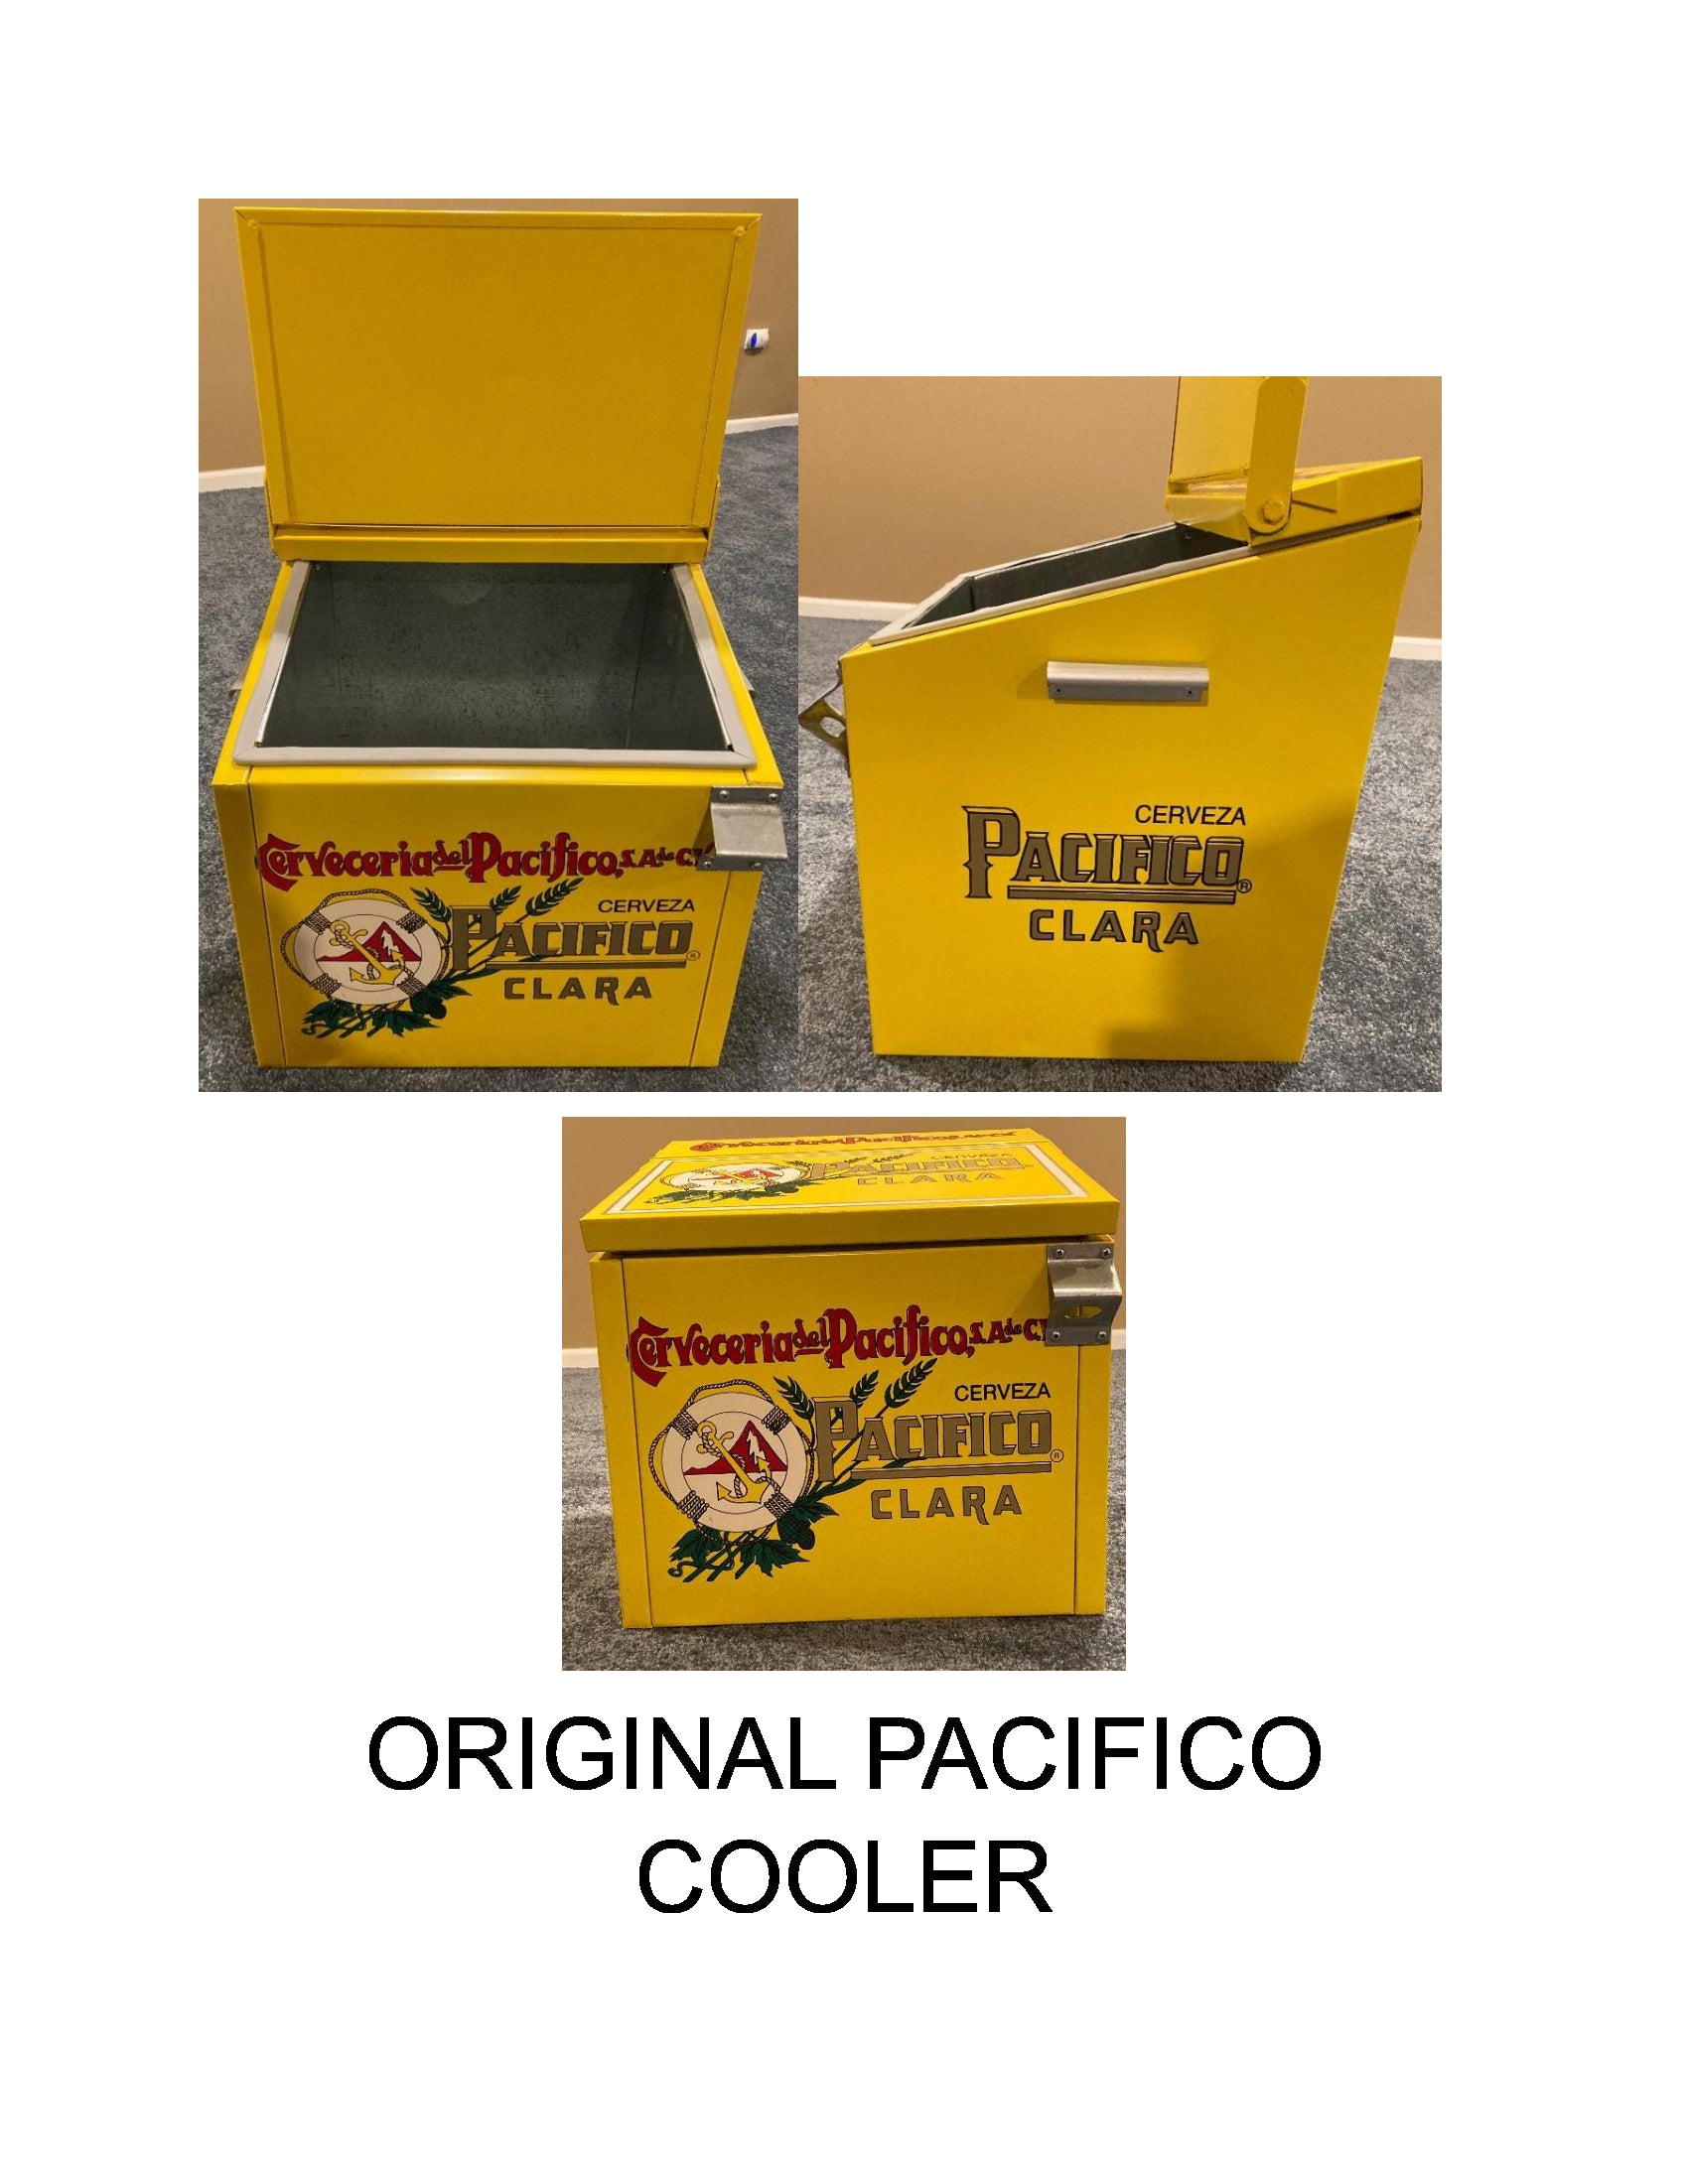 PACIFICO COOLER